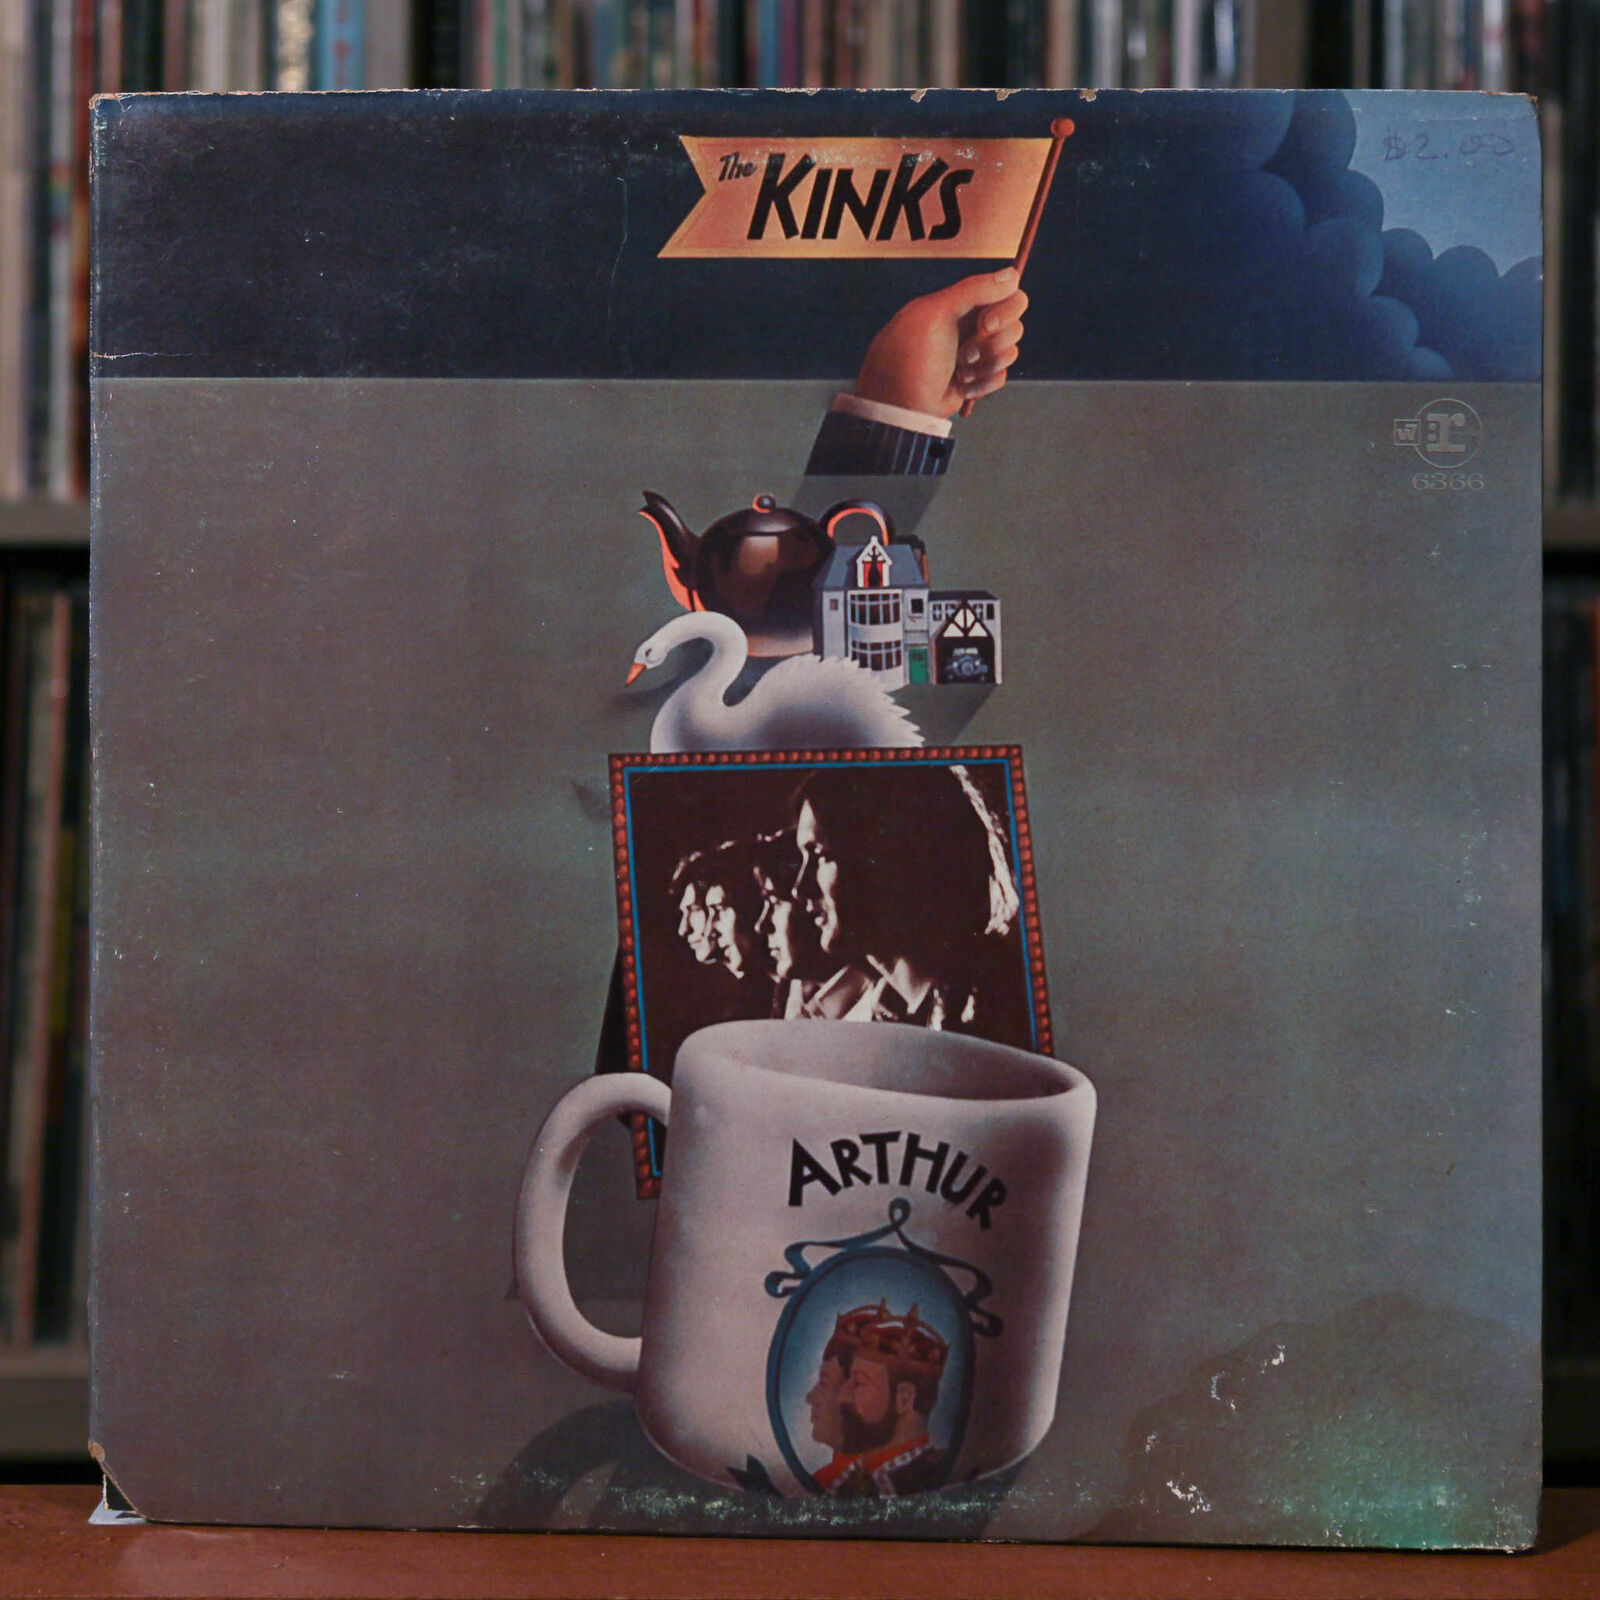 The Kinks - Arthur Or The Decline And Fall Of The British Empire - 1969 Reprise 